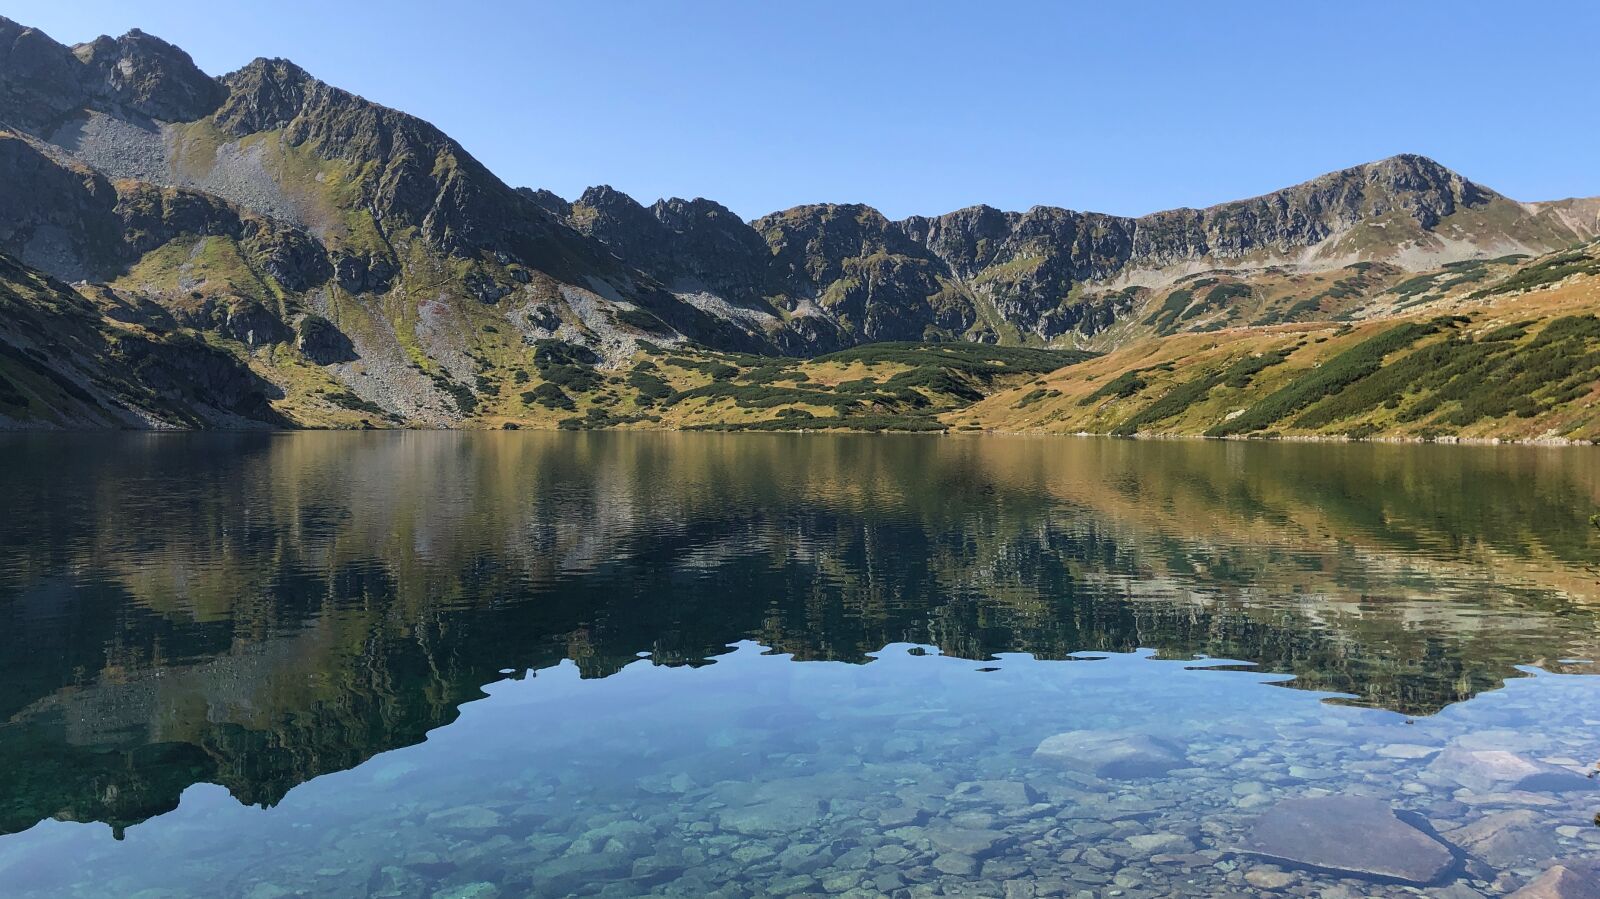 iPhone 8 back camera 3.99mm f/1.8 sample photo. Tatry, mountains, water photography